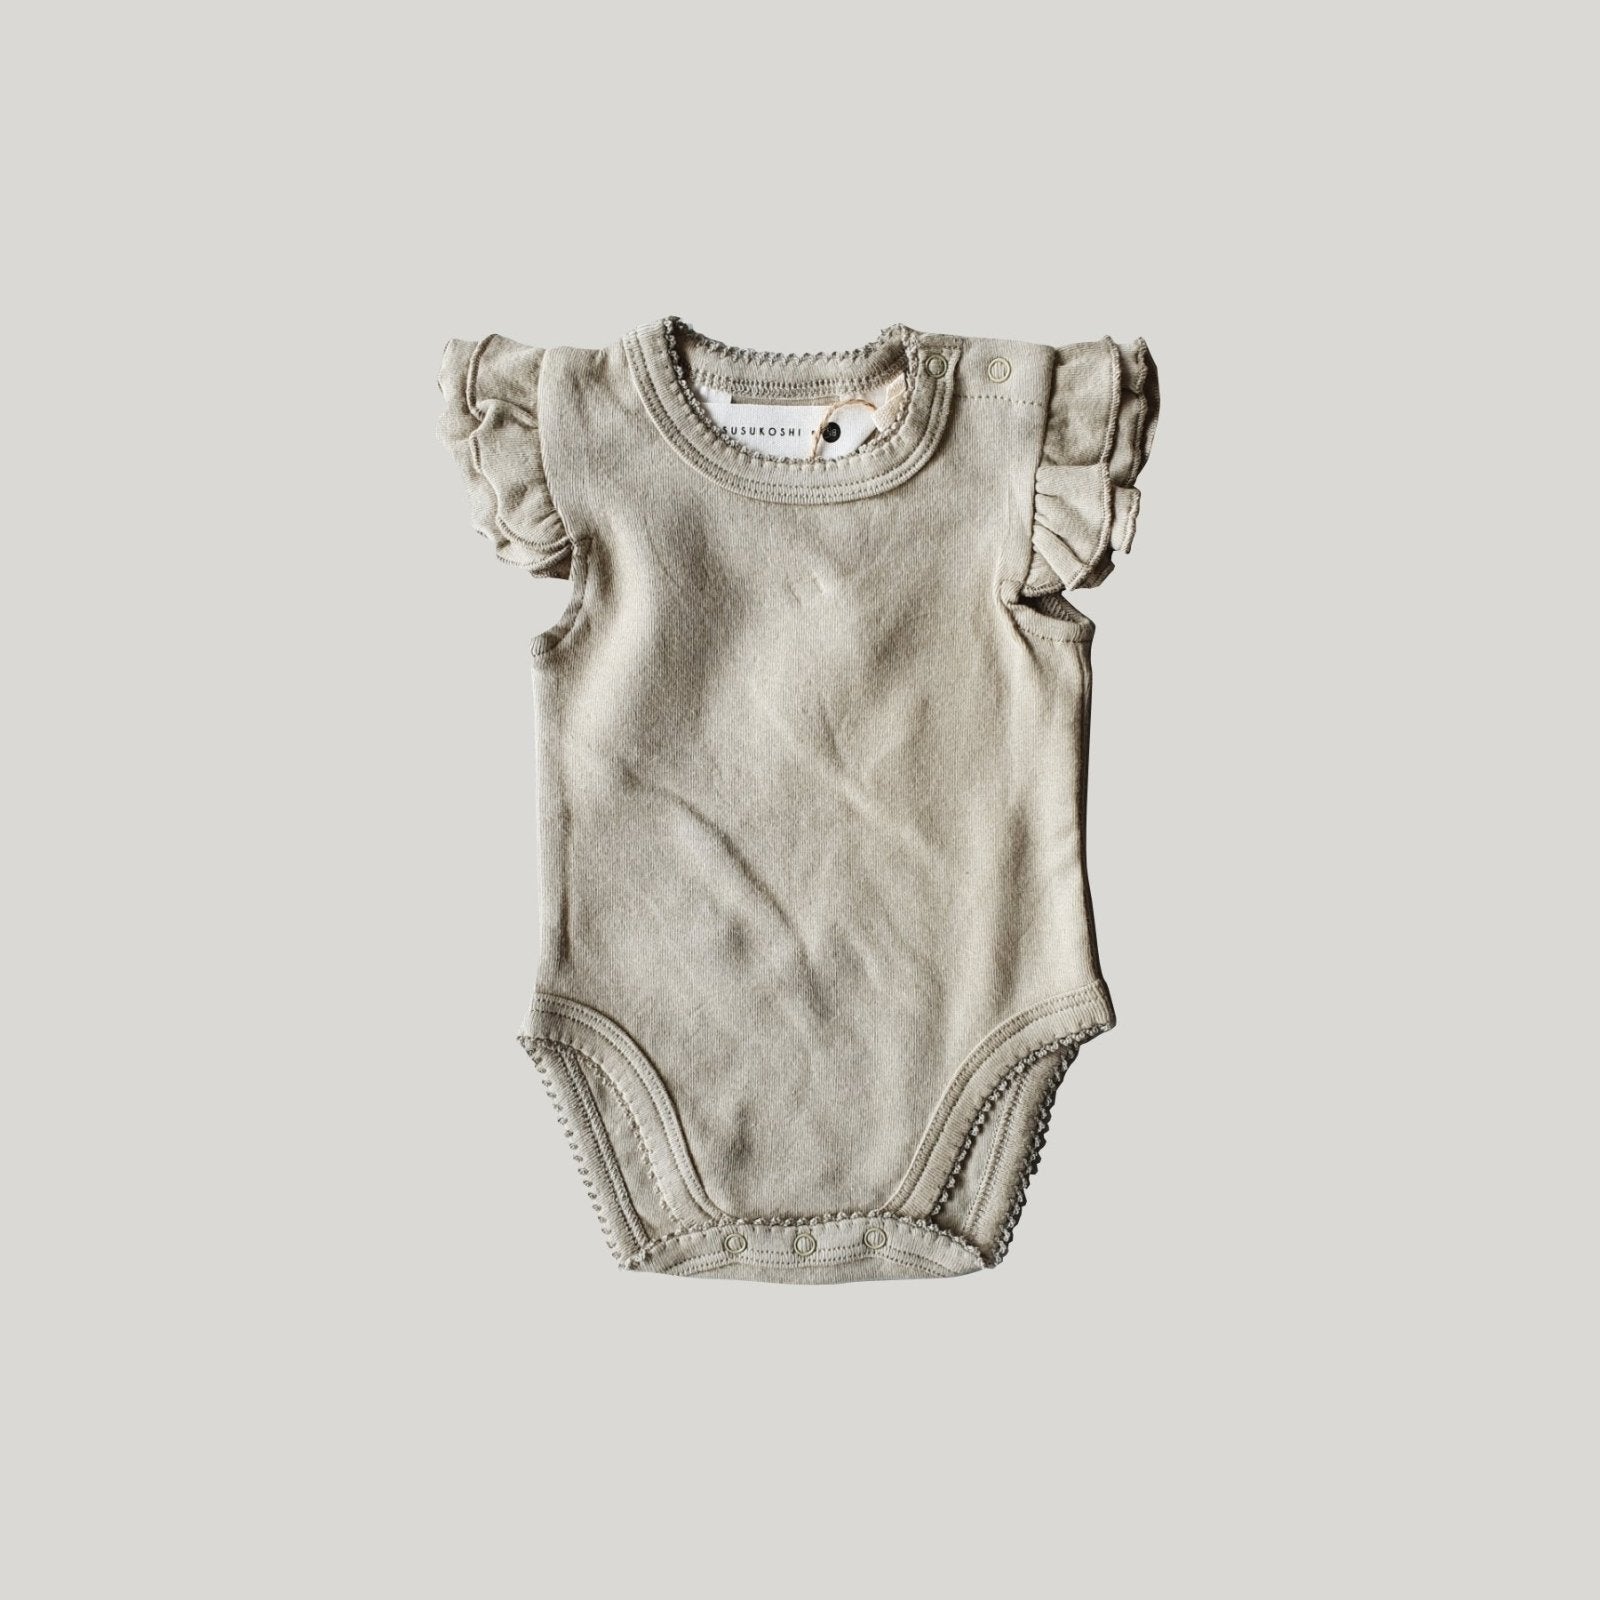 Flutter Body Pebble find Stylish Fashion for Little People- at Little Foxx Concept Store